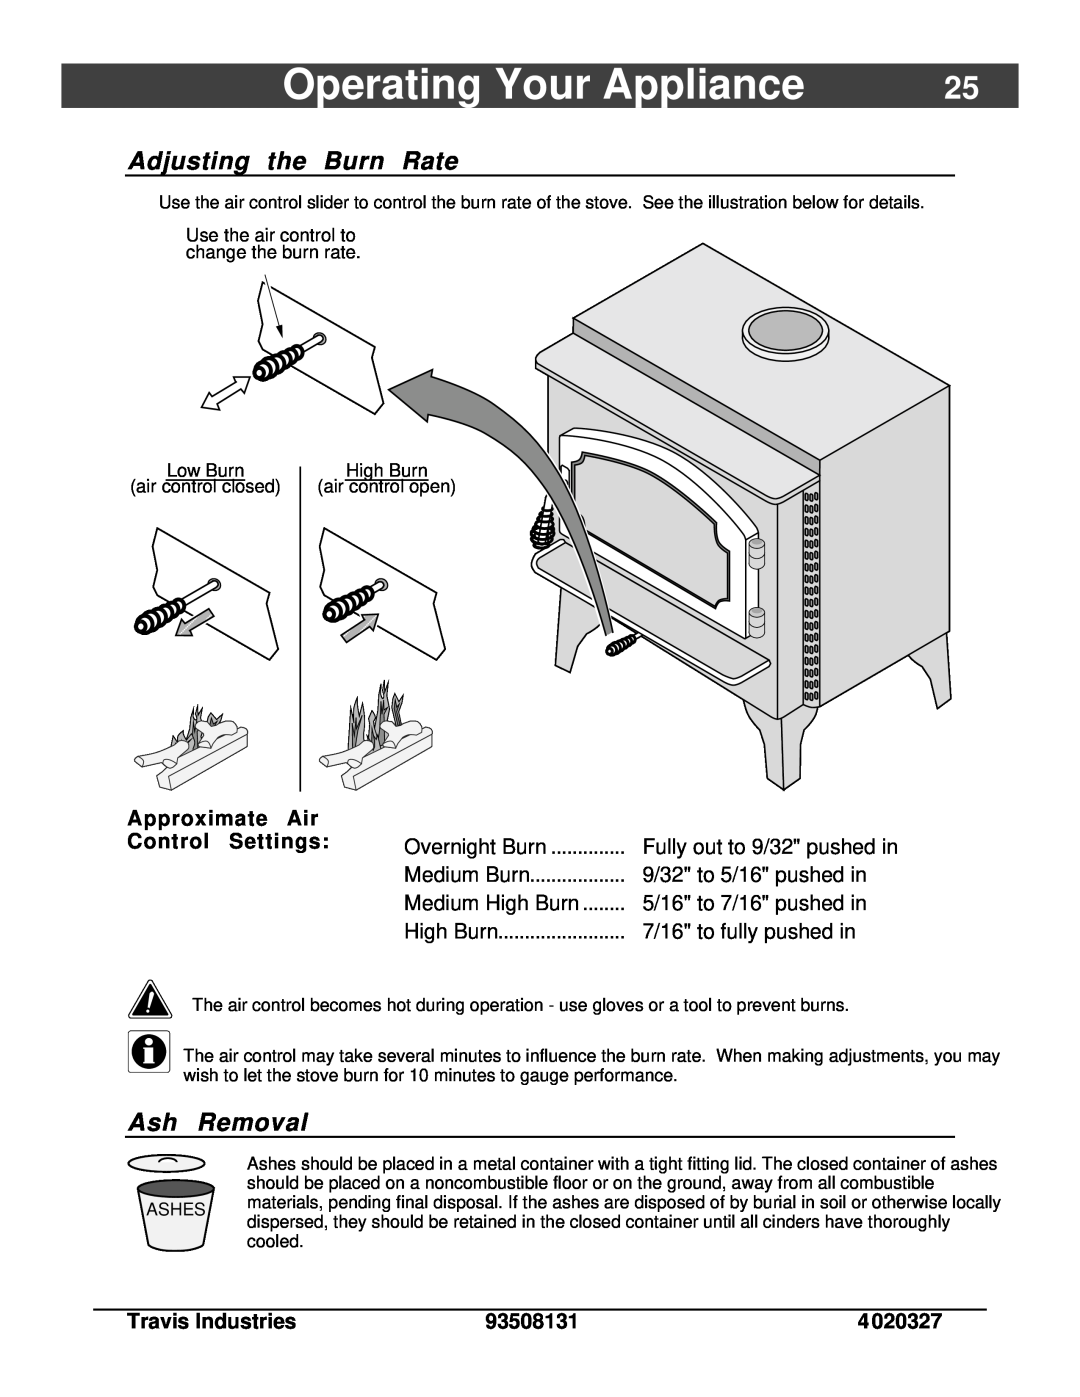 Lopi Answer Wood Stove owner manual Operating Your Appliance, Adjusting the Burn Rate, Ash Removal, Low Burn, High Burn 